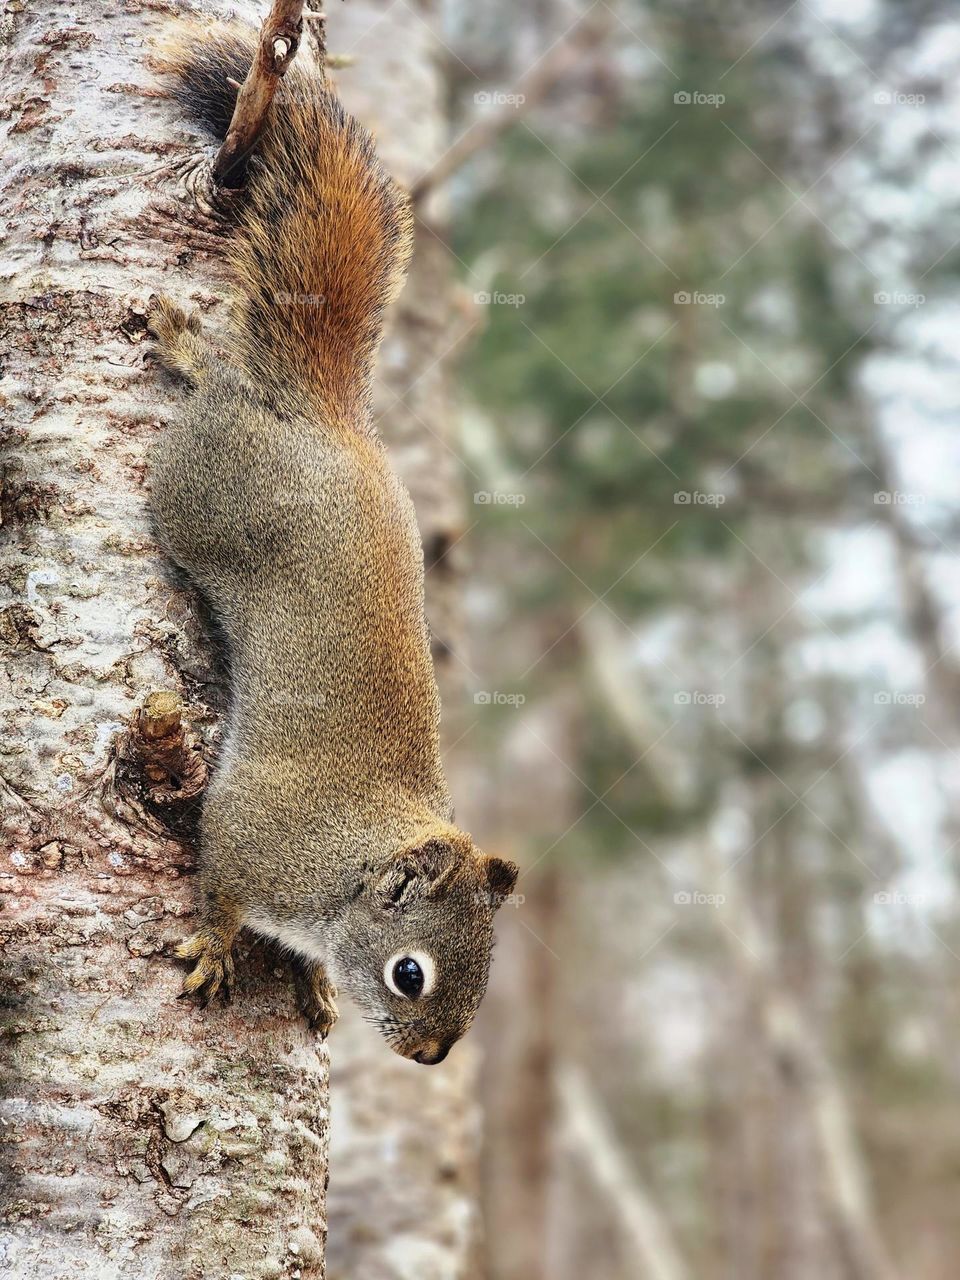 Squirrel hanging on a tree.